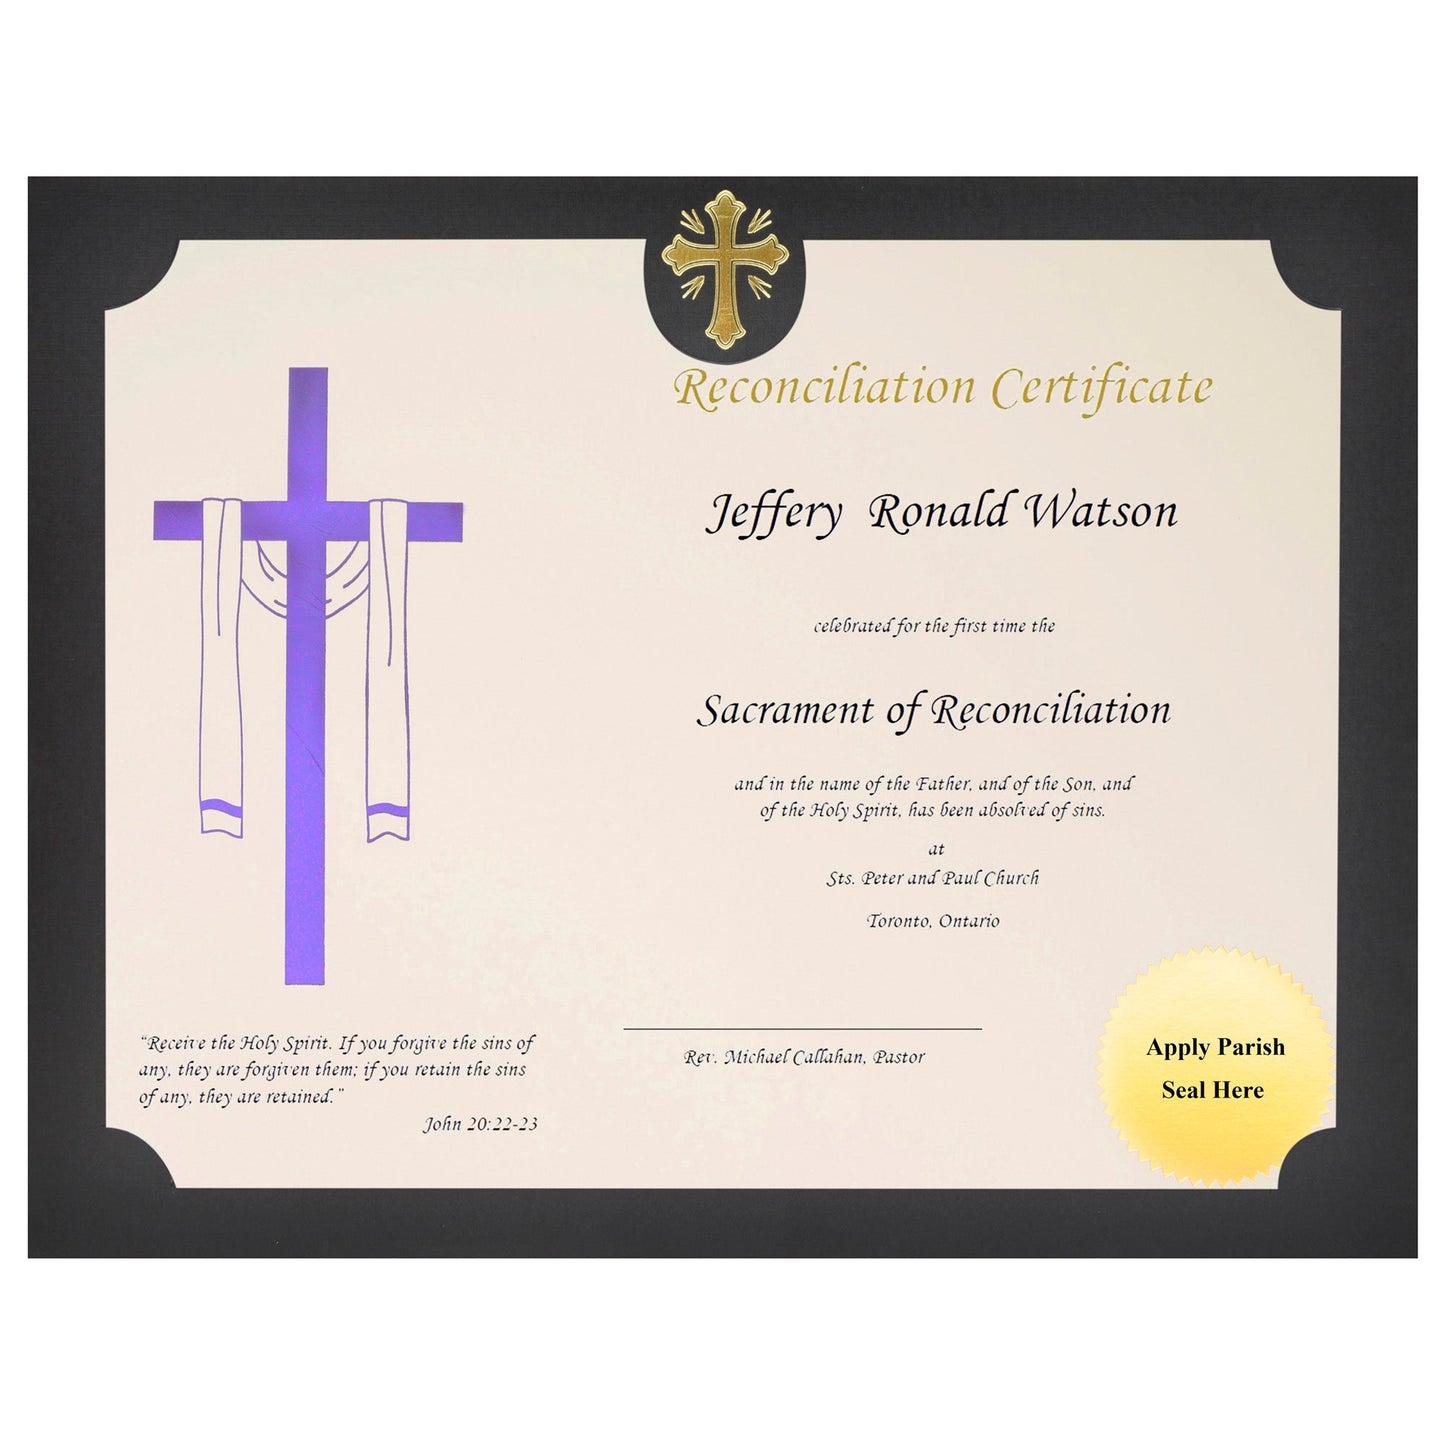 St. James® Religious Certificates - Reconciliation Certificate, 65 lb, Purple Foil, Ivory Card Stock, Pack of 50